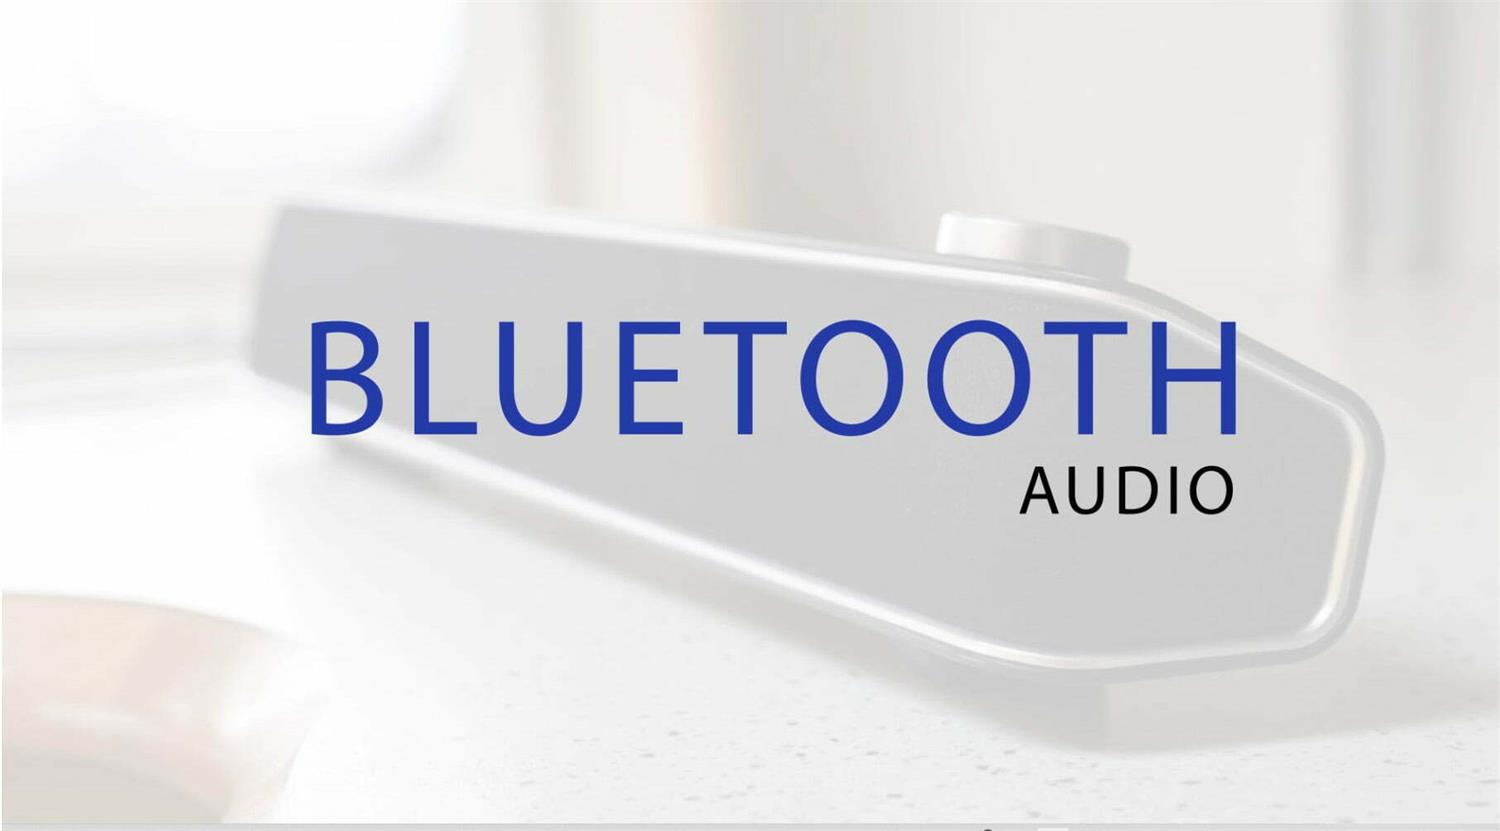 Bluetooth 4.0 Audio connectivity built in